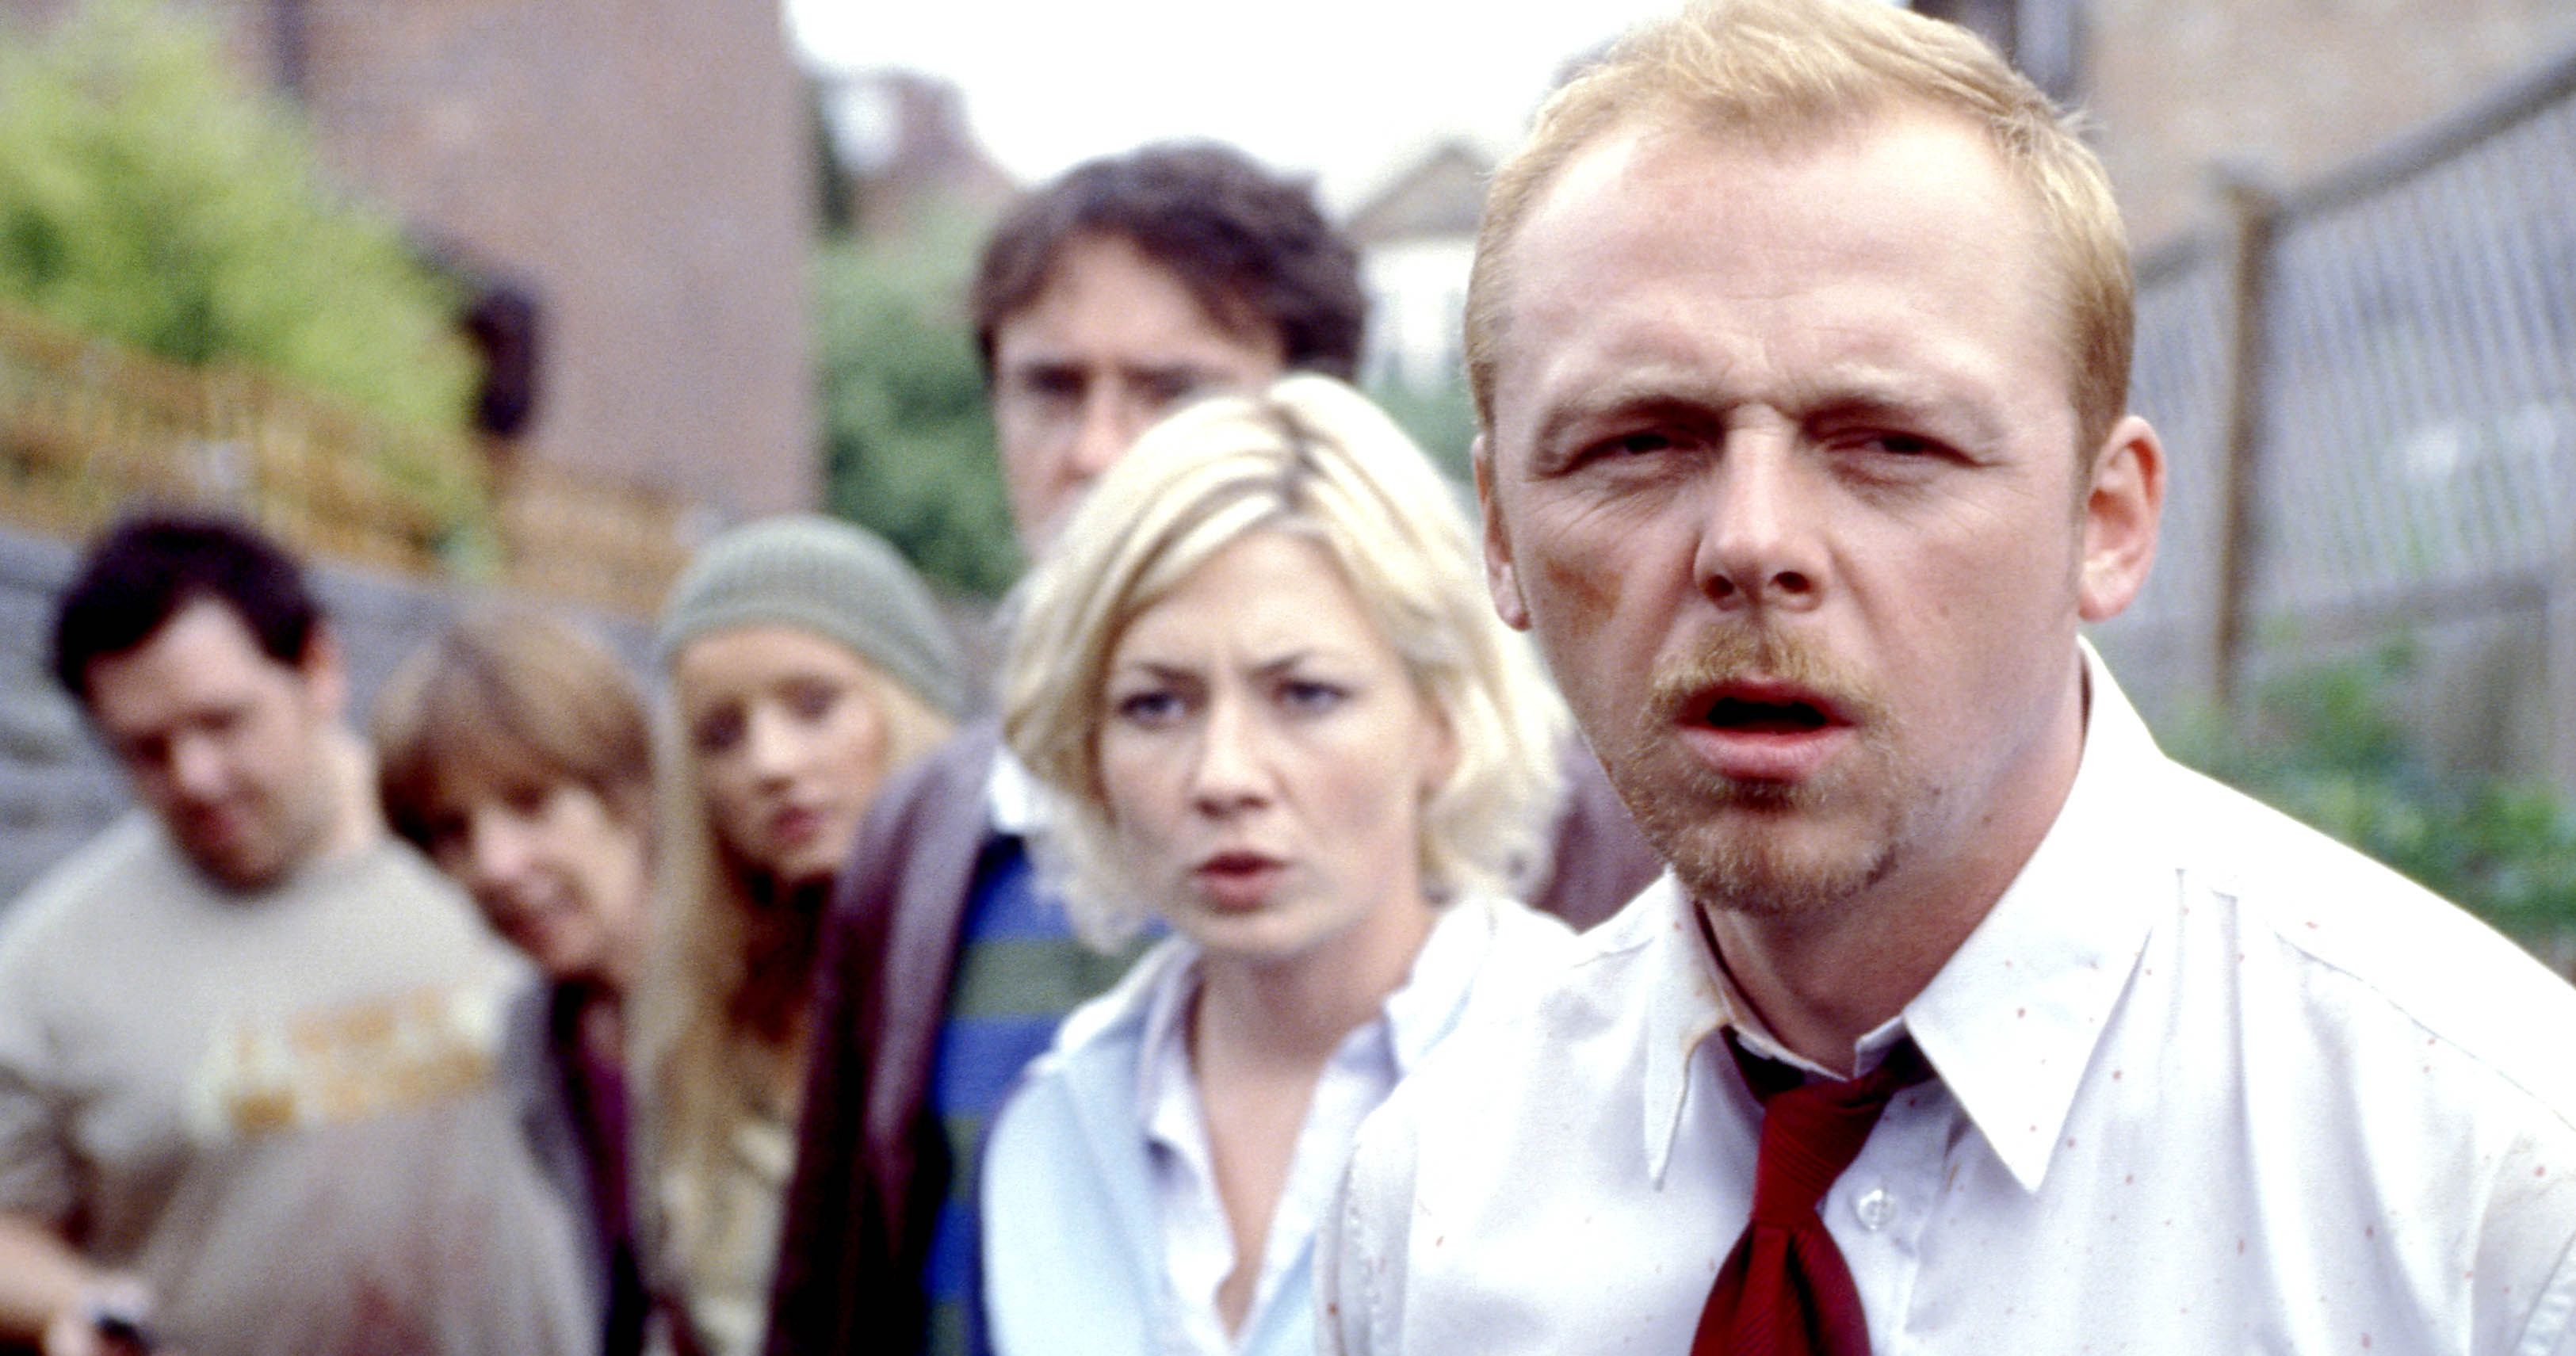 Shaun of the Dead Director Edgar Wright Has No Interest in Making a Sequel